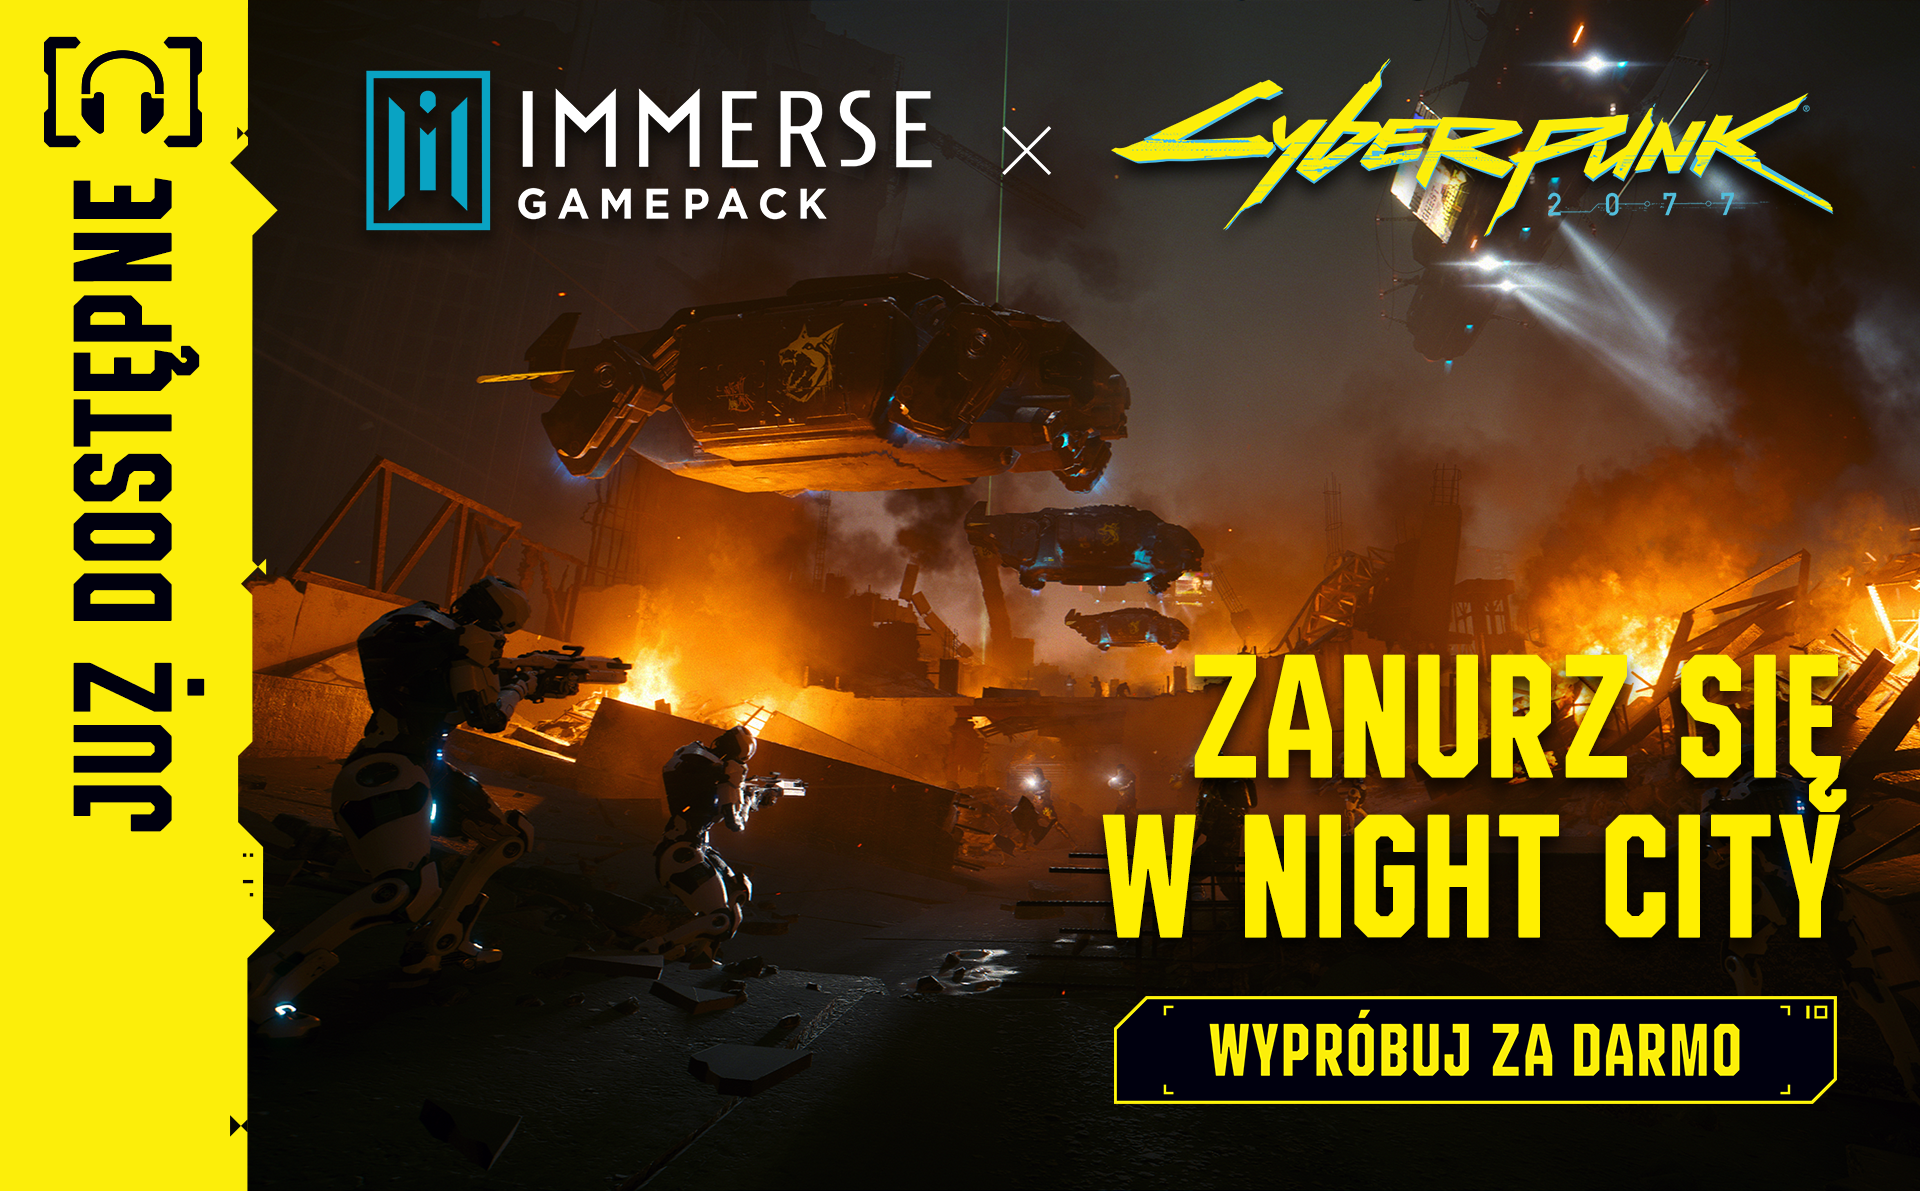 PO_Immerse_Cyberpunk_2077_Launch_16x9.png